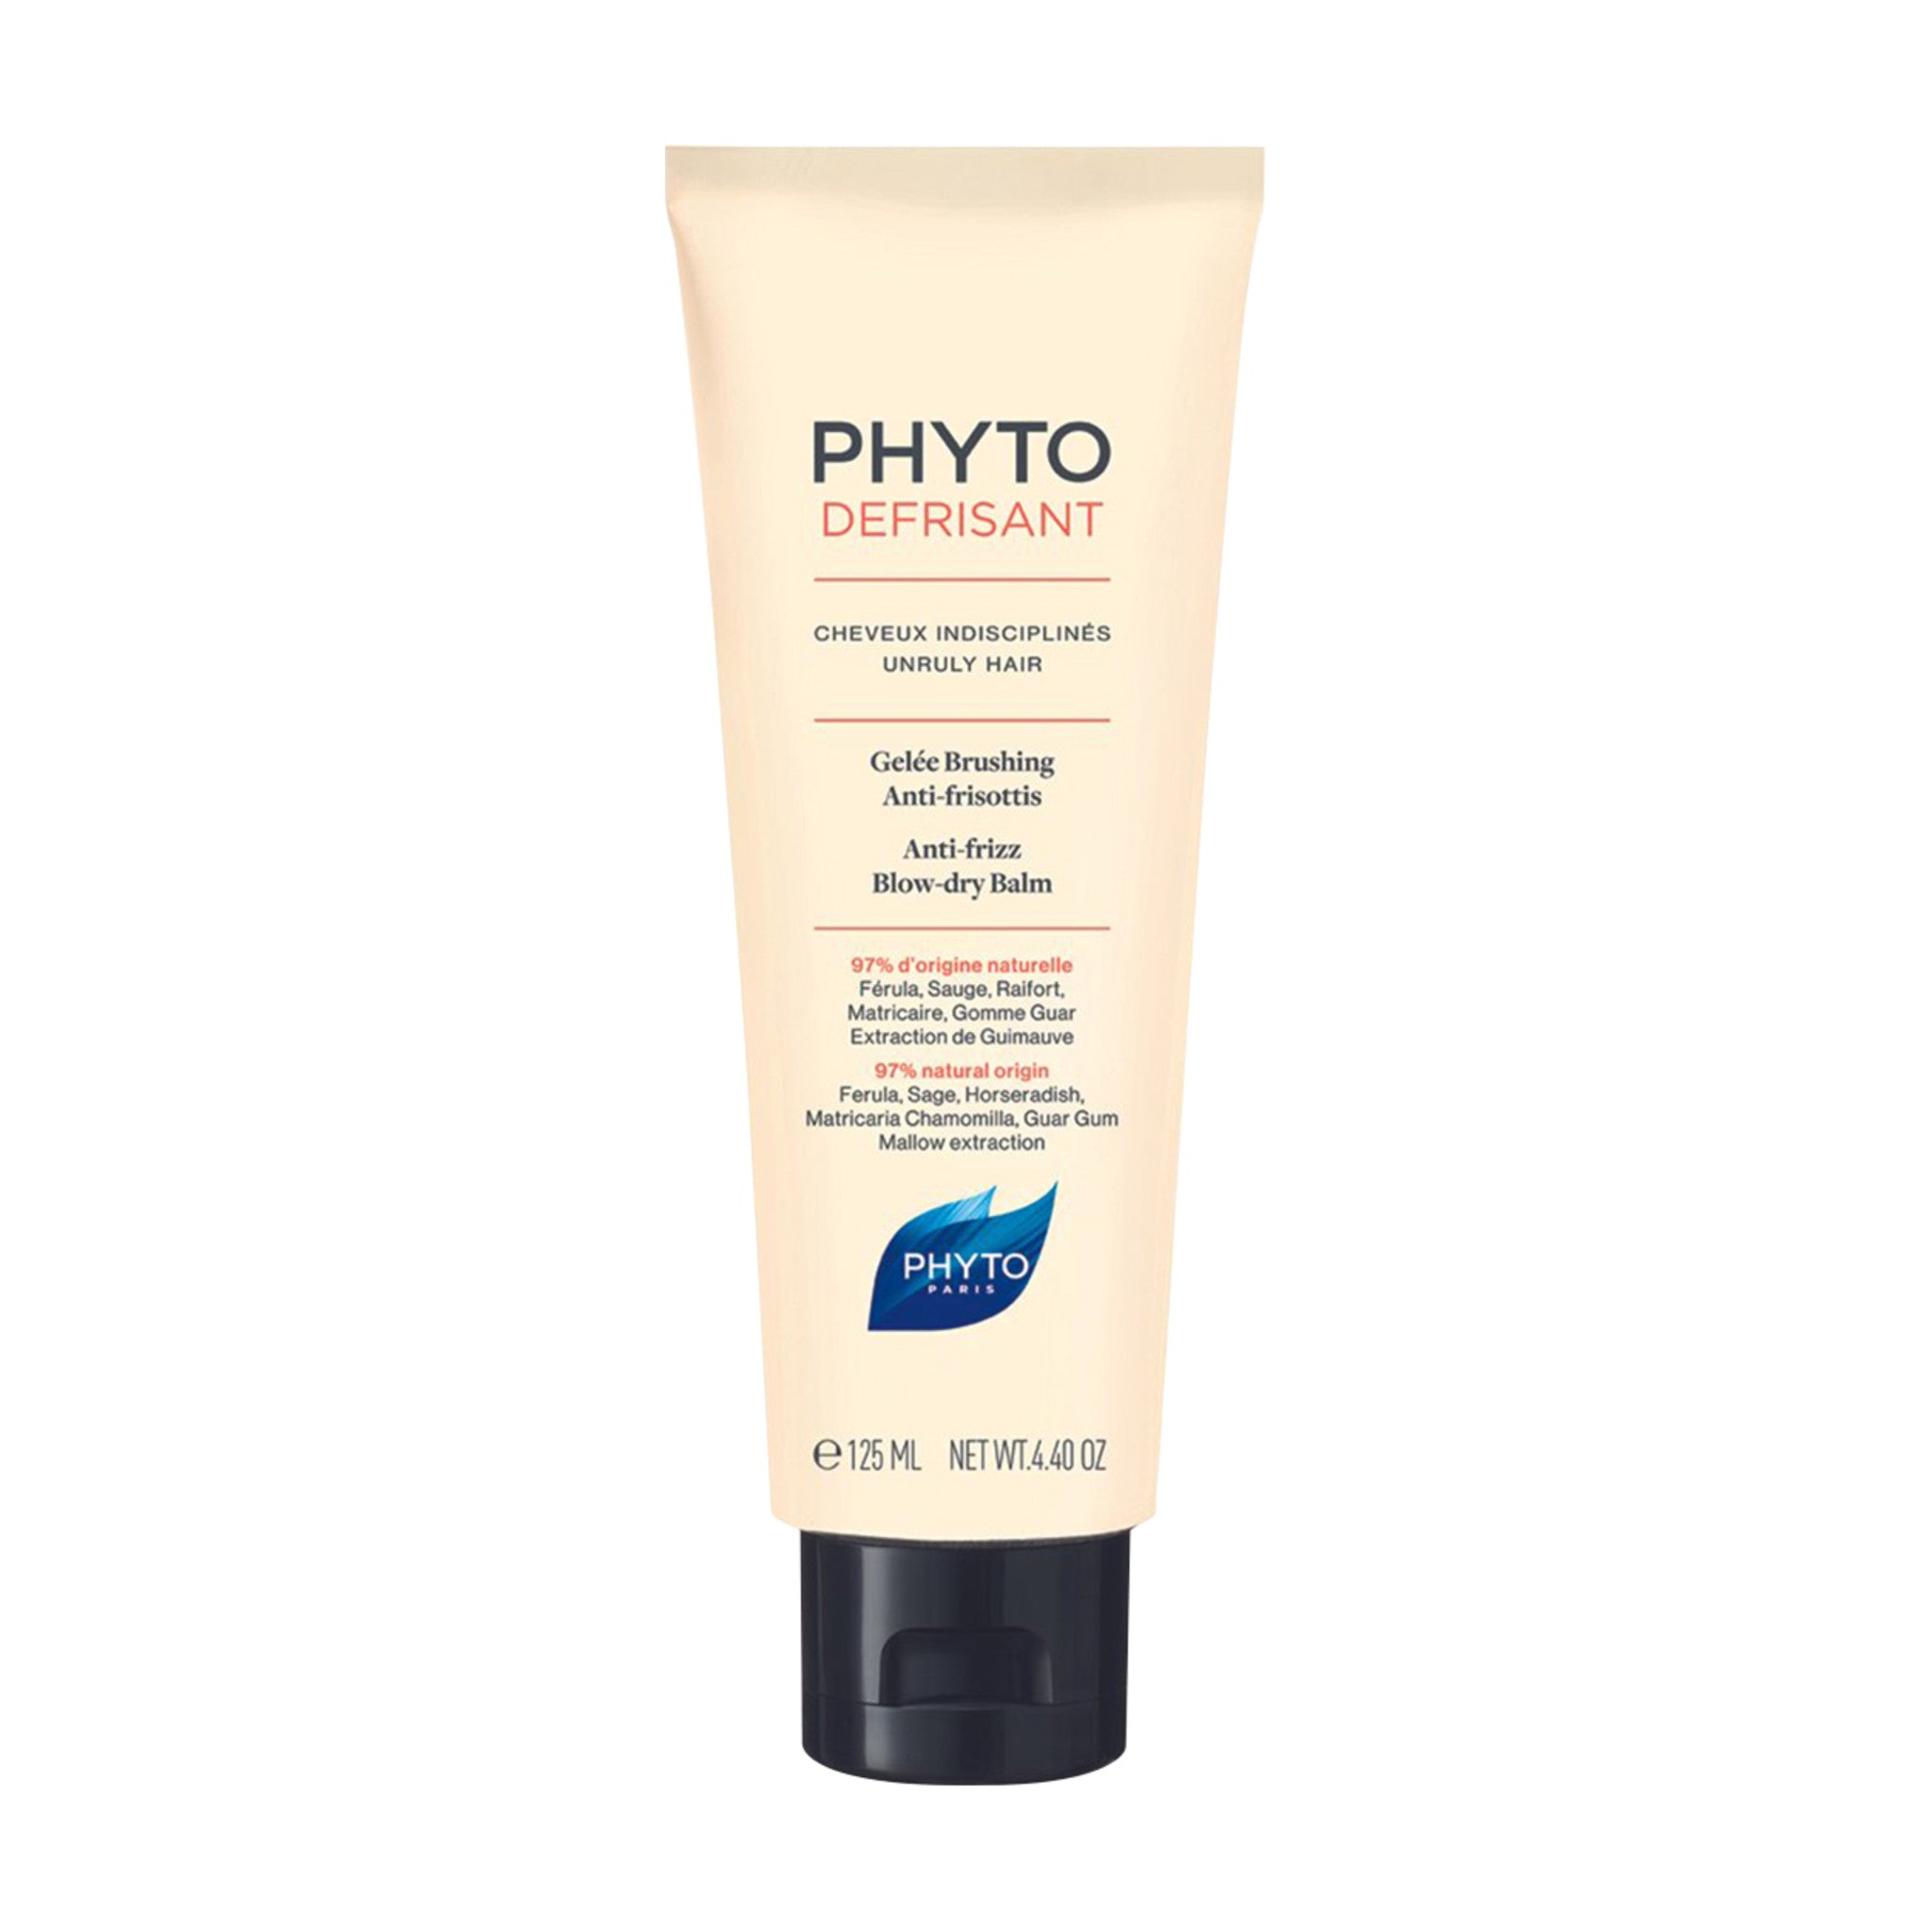 Phyto Phytodefrisant Blow-dry Balm main image.